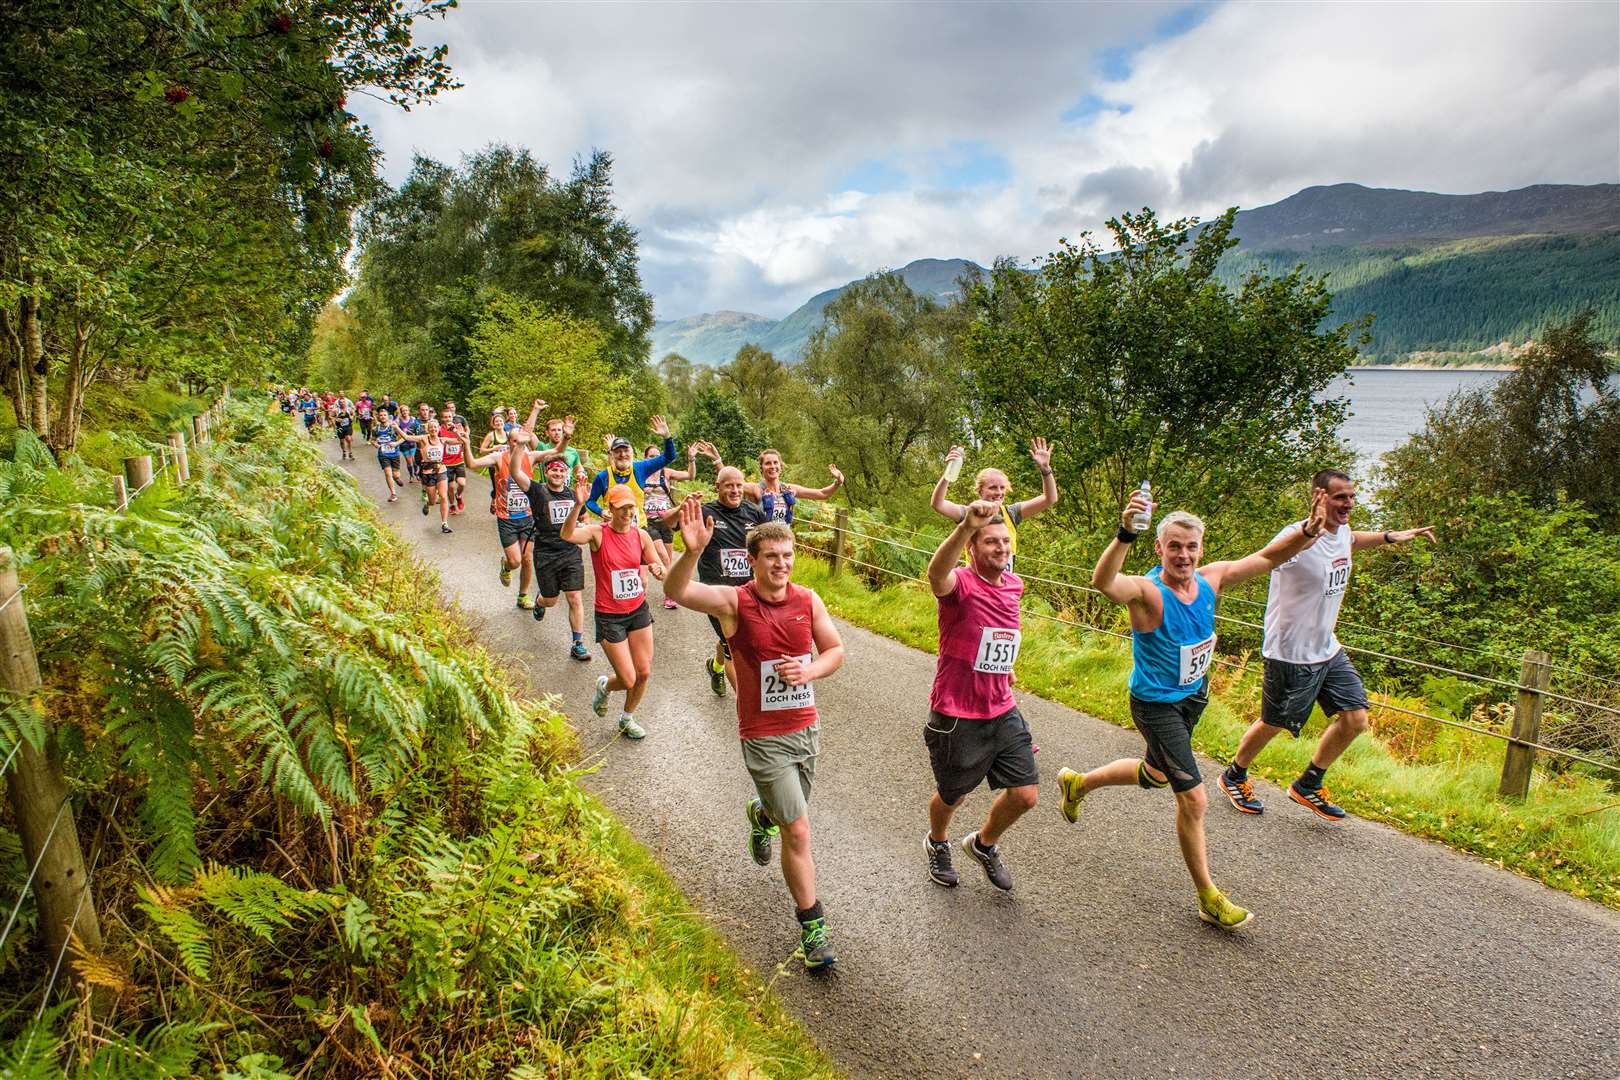 Entries for the Baxters Loch Ness Marathon and Festival of Running are open until September 26.